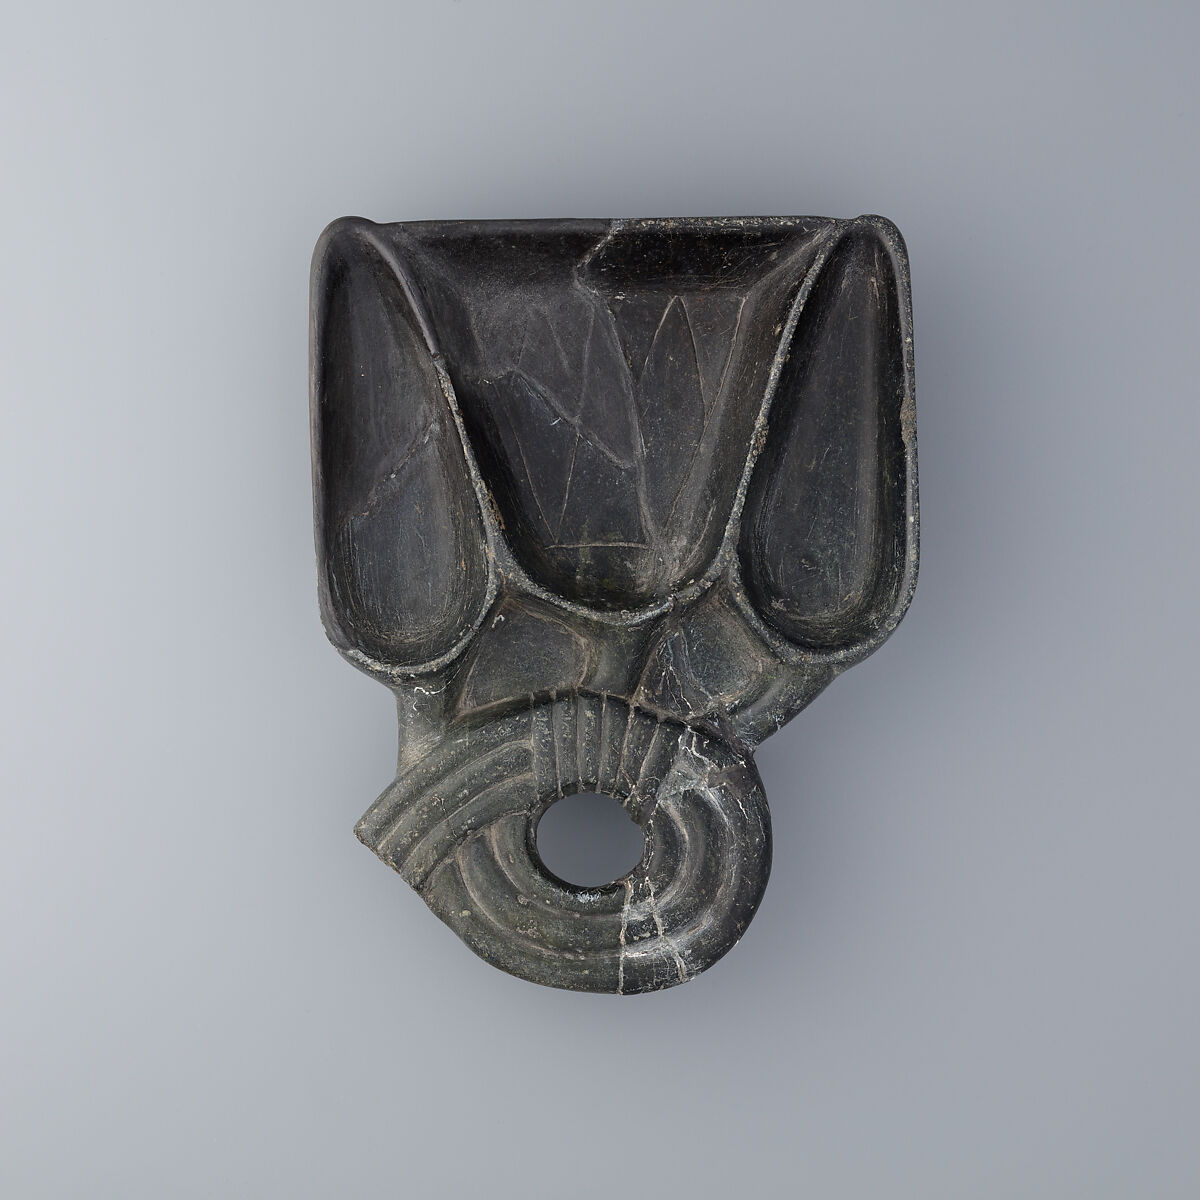 Cosmetic dish in the shape of a lotus flower and buds, Steatite 